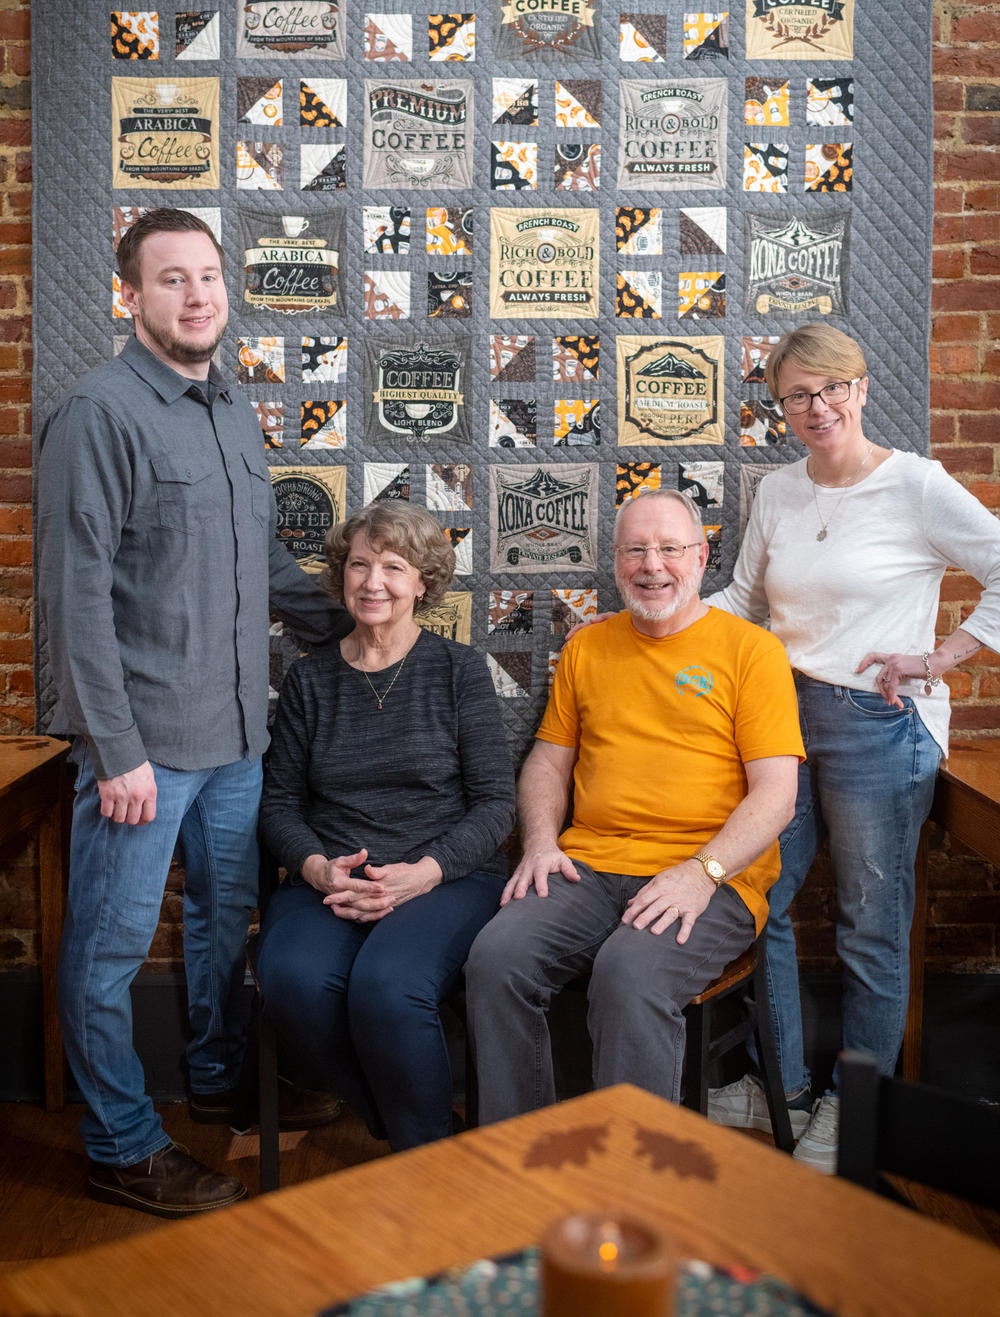 Sibling Coffee Roasters is a family affair; brother Benjamin Withem will stop by to indulge in a cold brew and chat with mother Naysa Withem, father Michael Withem, and sister and owner Libby Powell. Here, they pose in front of a quilt Naysa made for the shop.